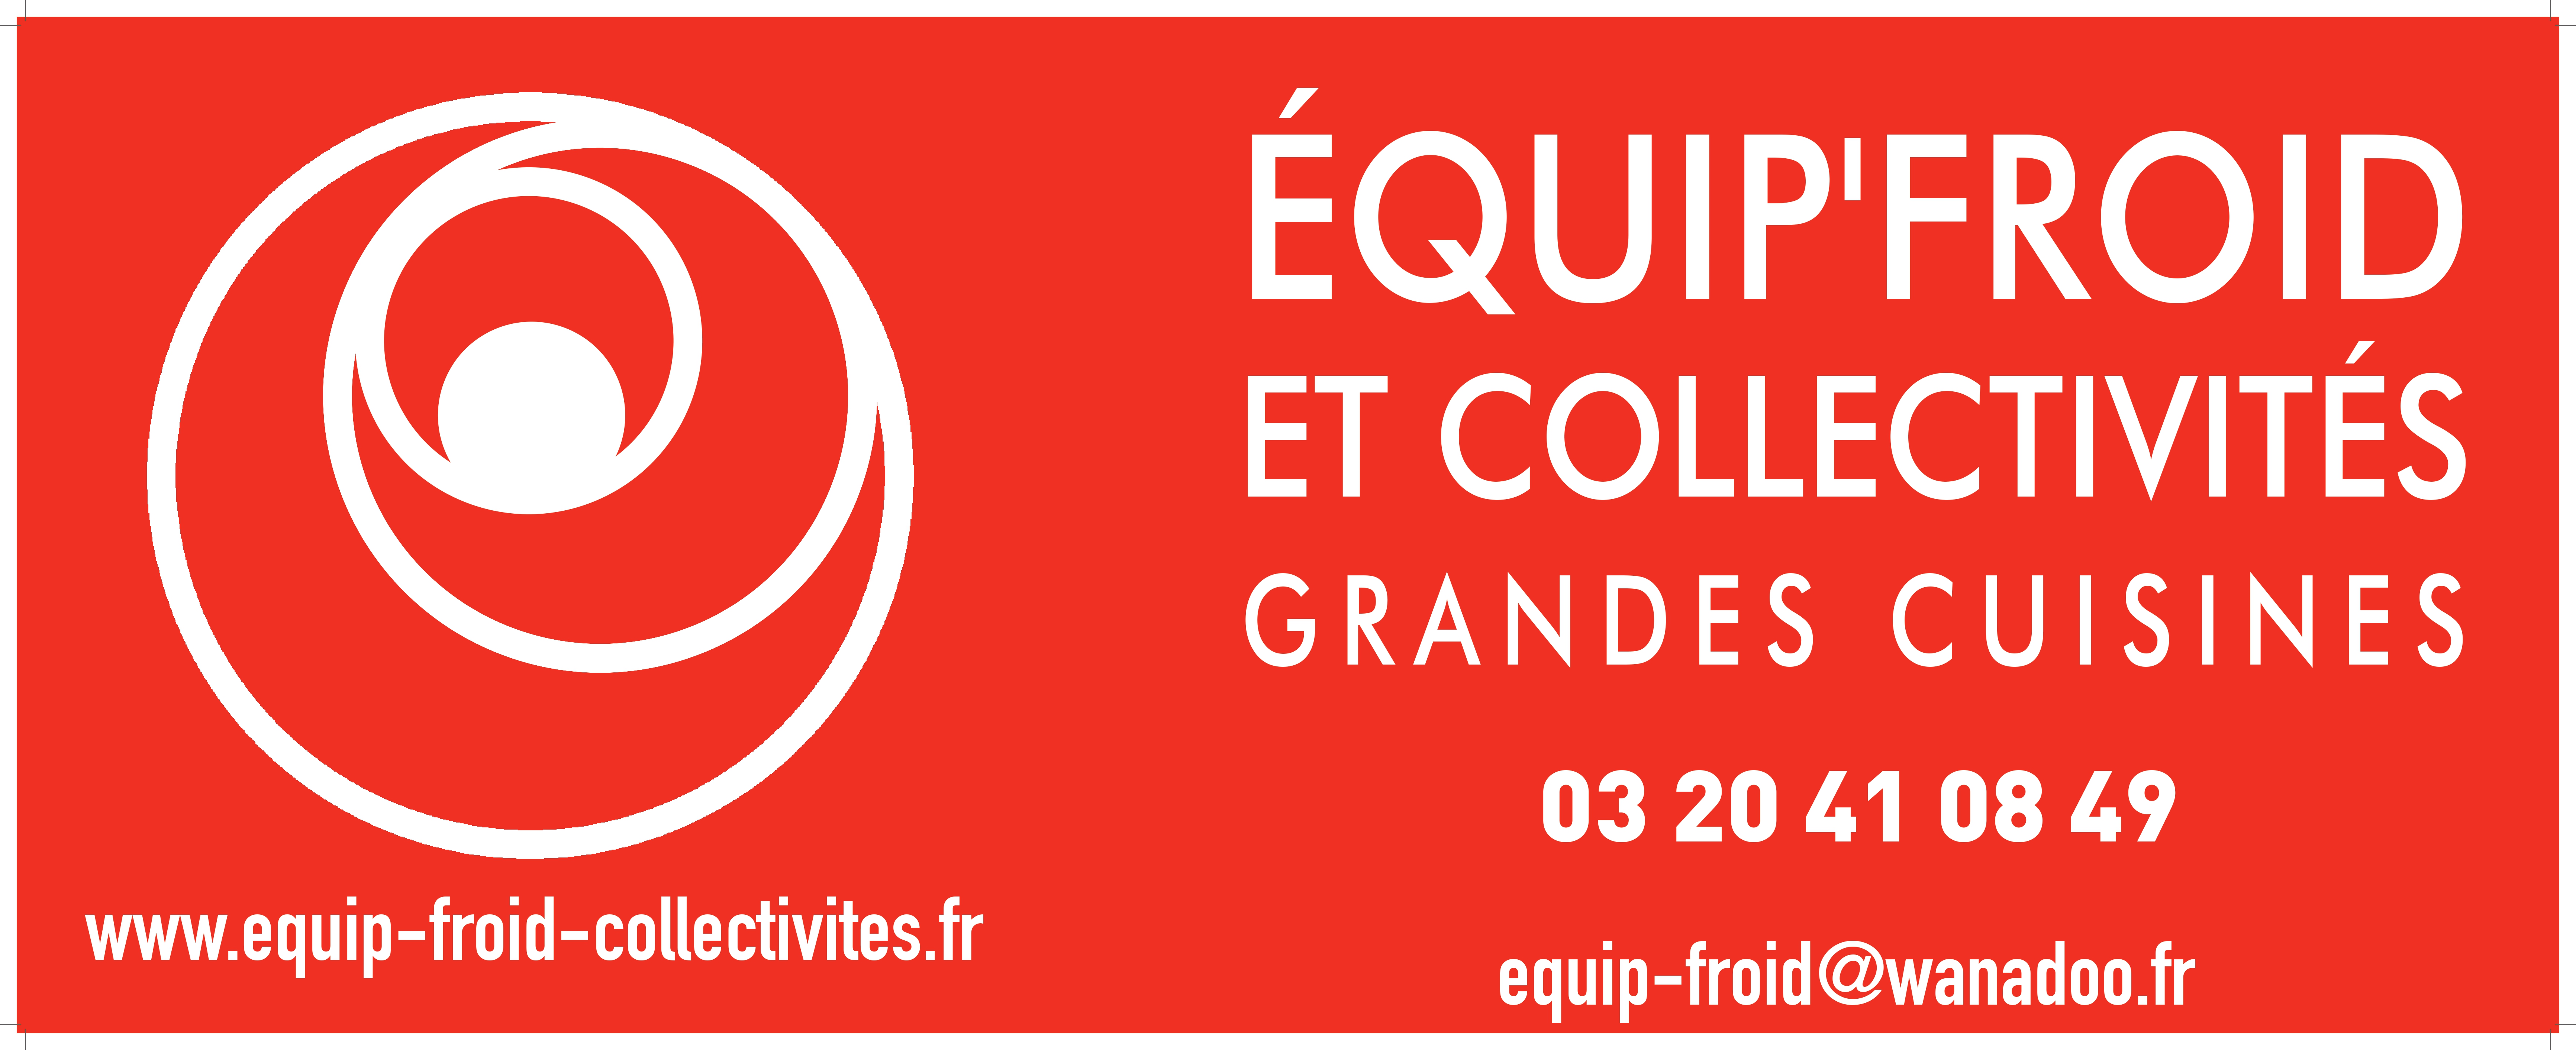 Logo Equip-froid-collectivites